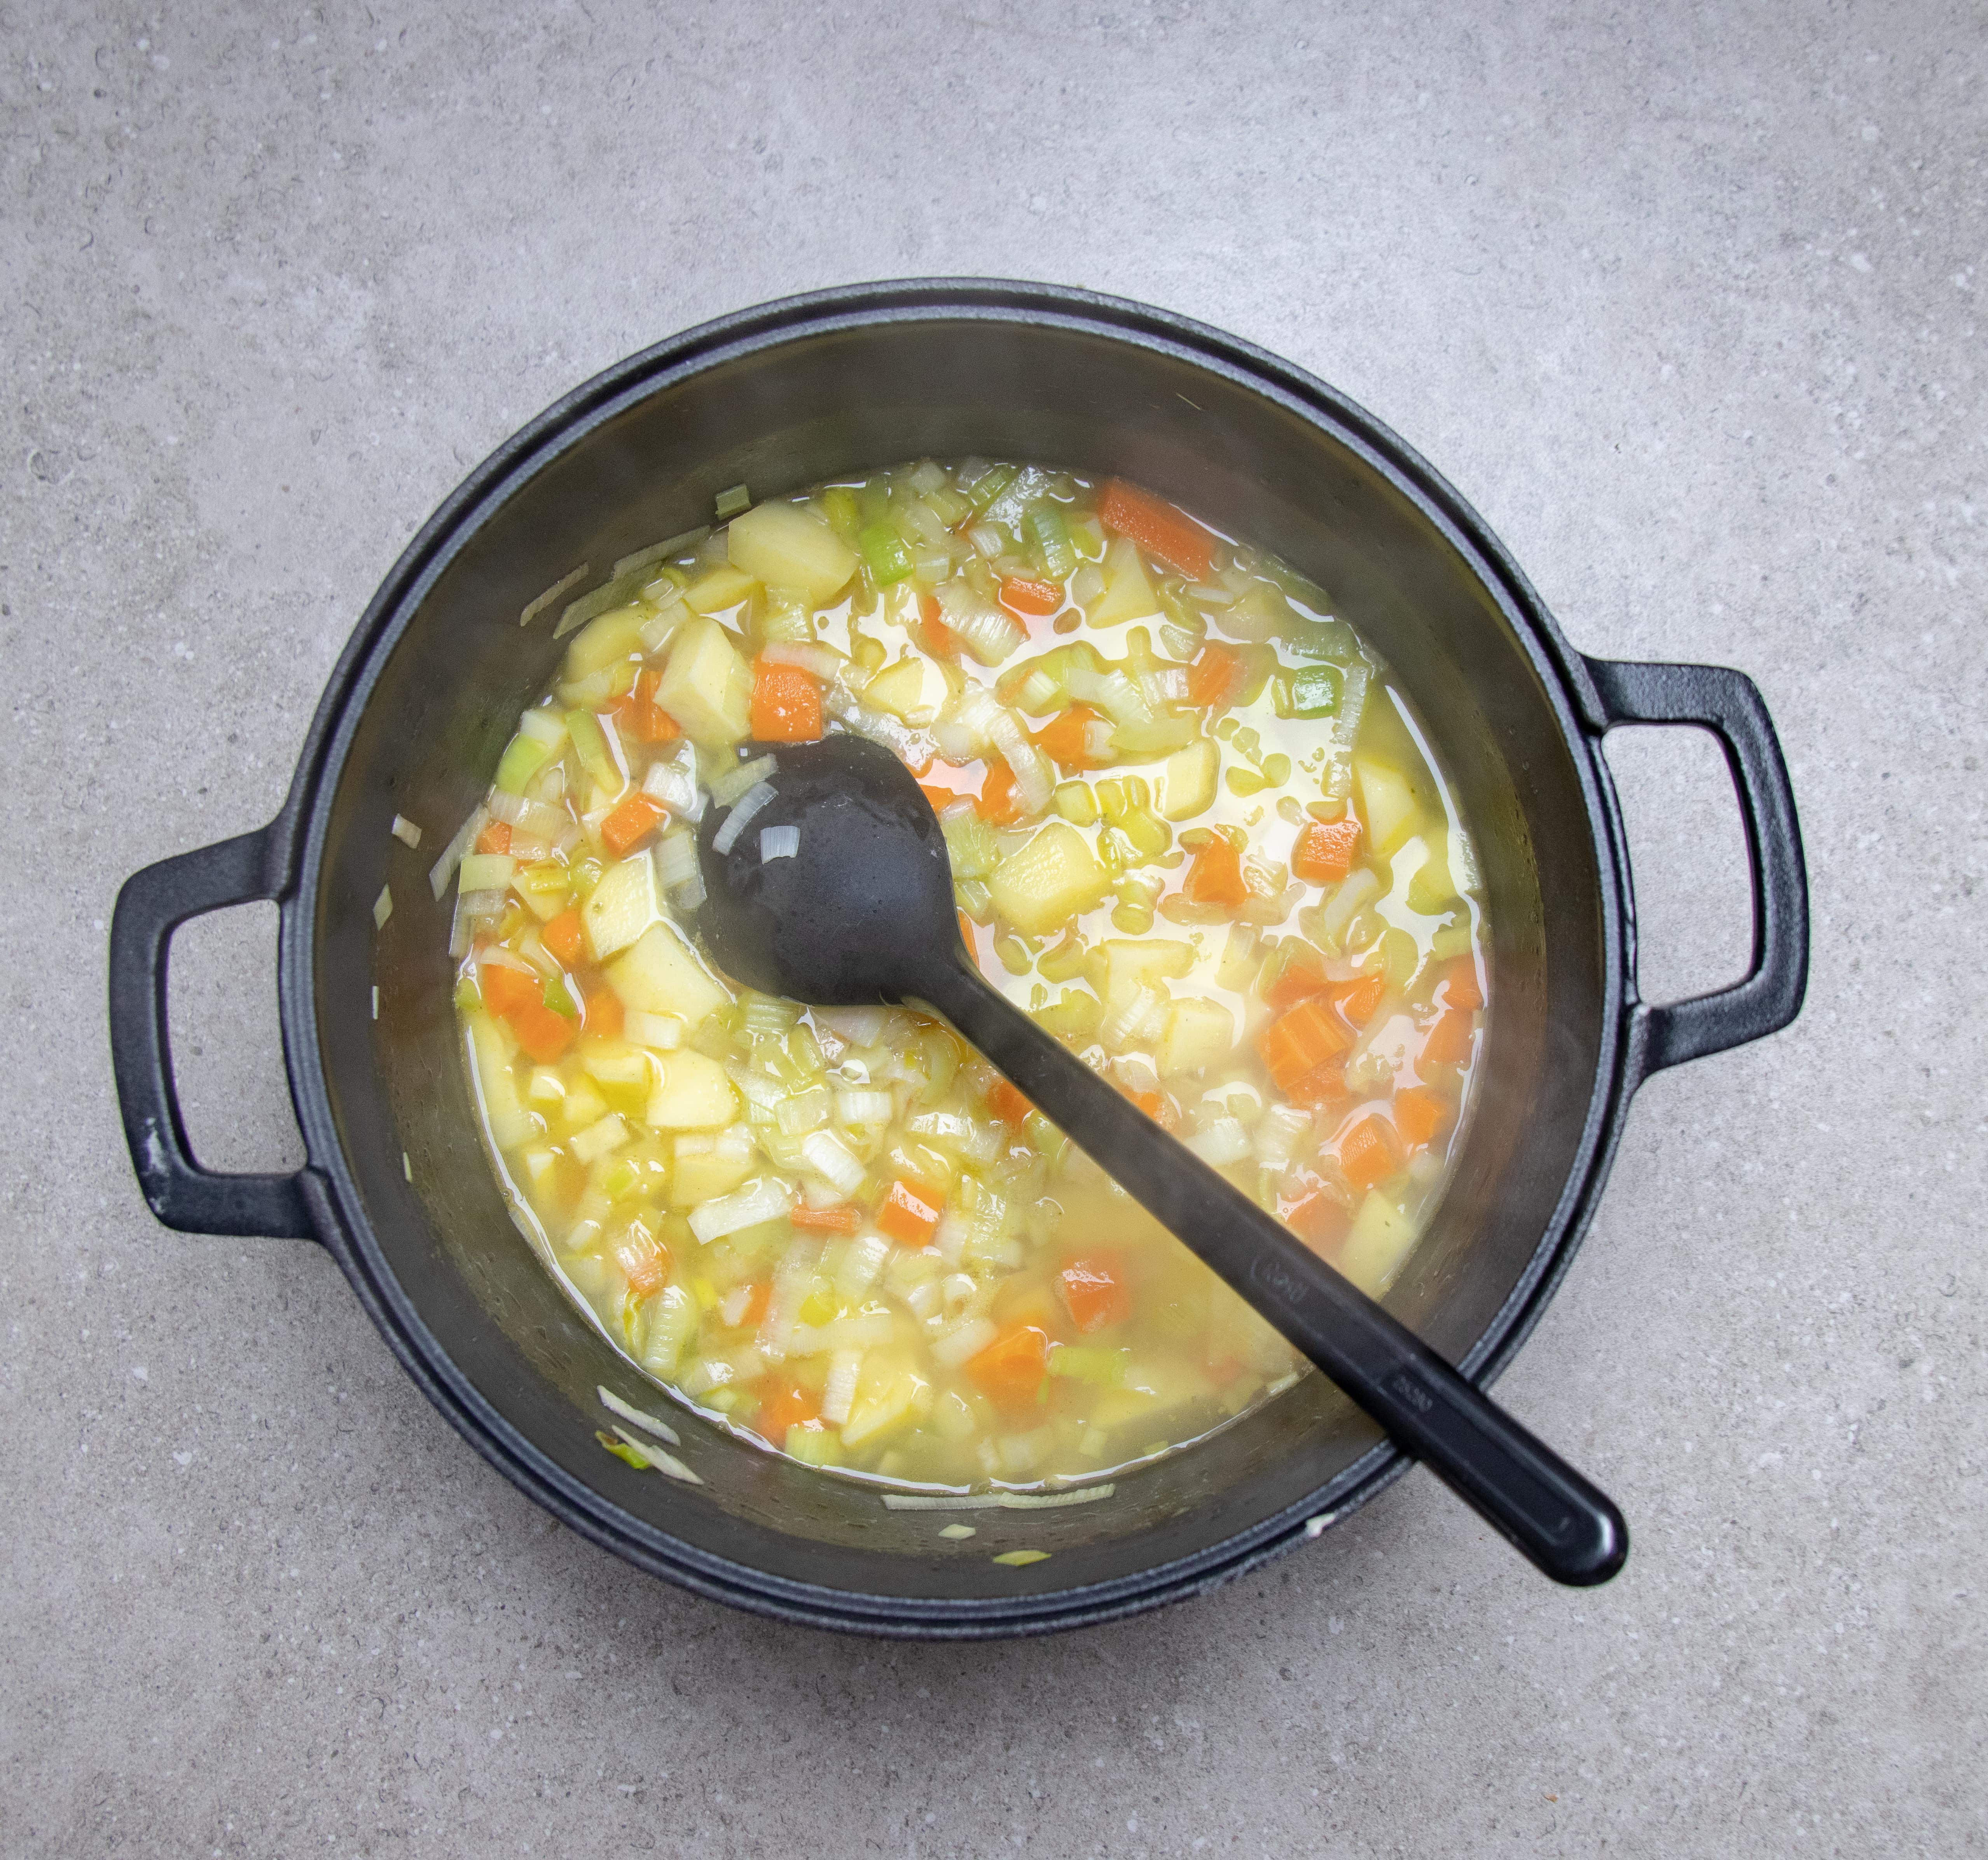 finsk laksesuppe (lohikeitto)